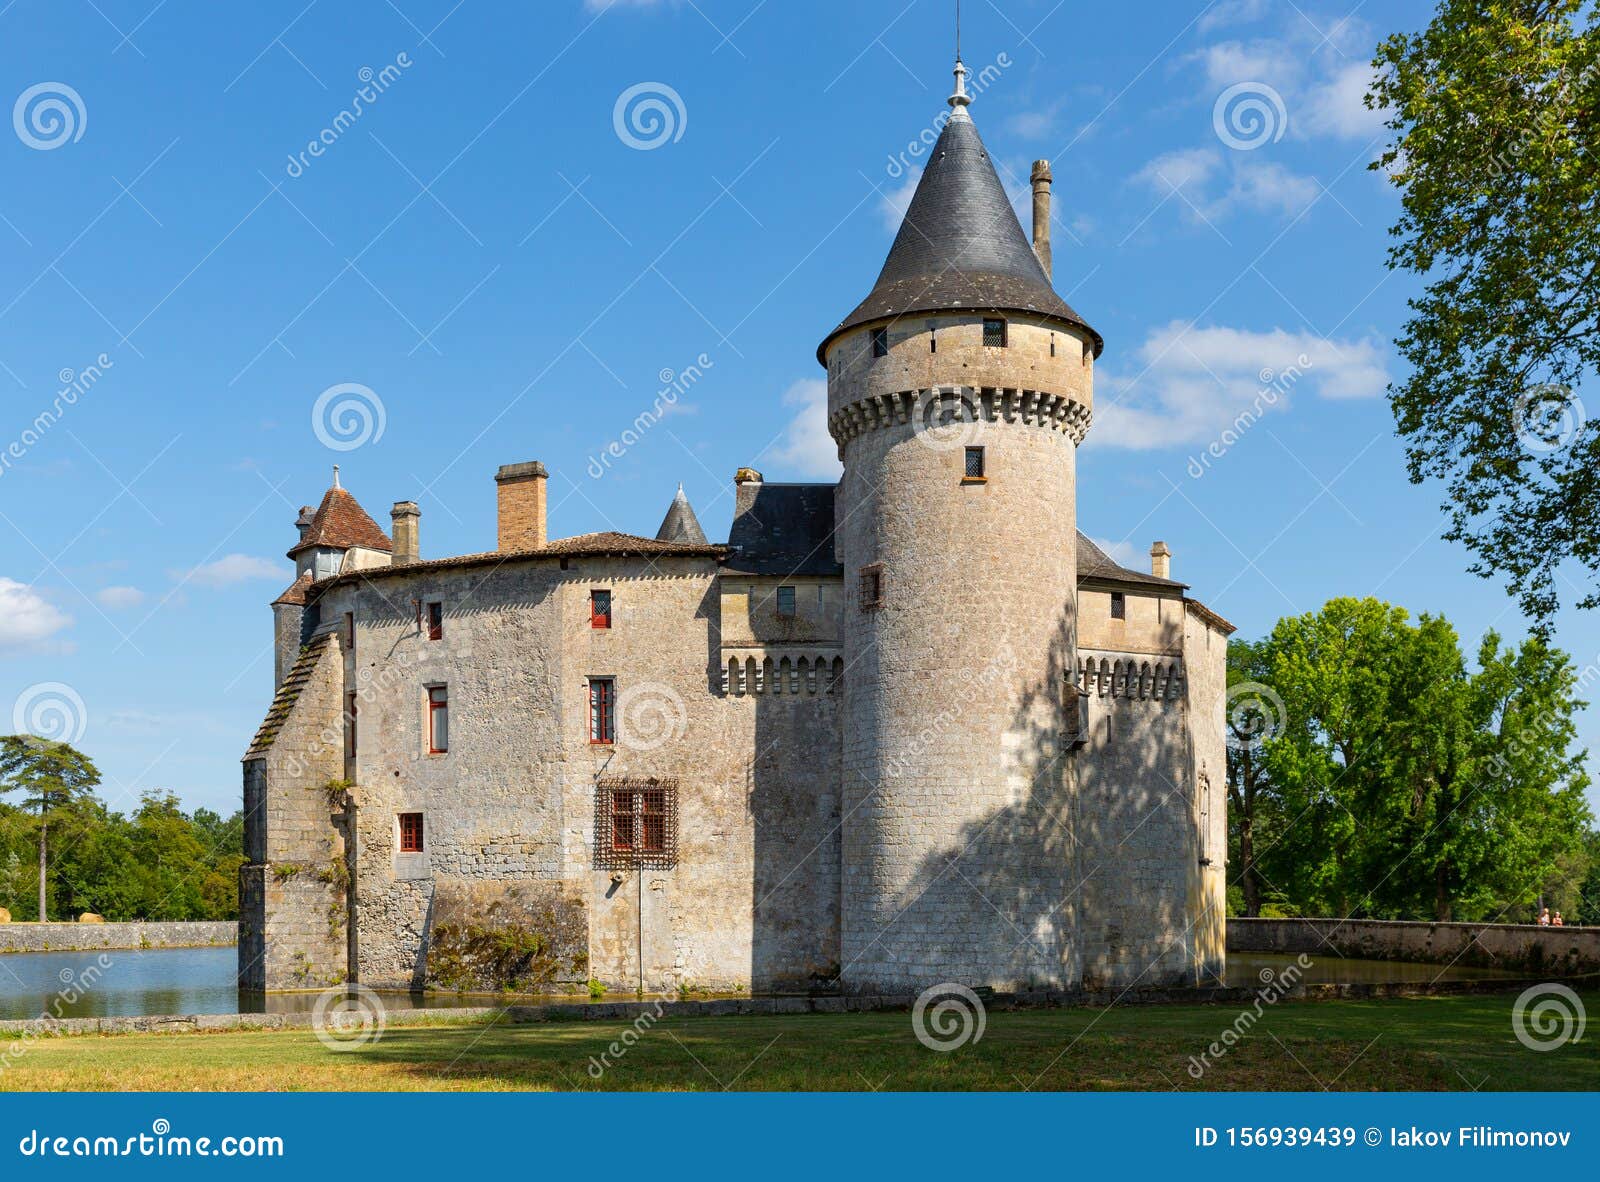 view of medieval castle chateau de la brede in gironde. france